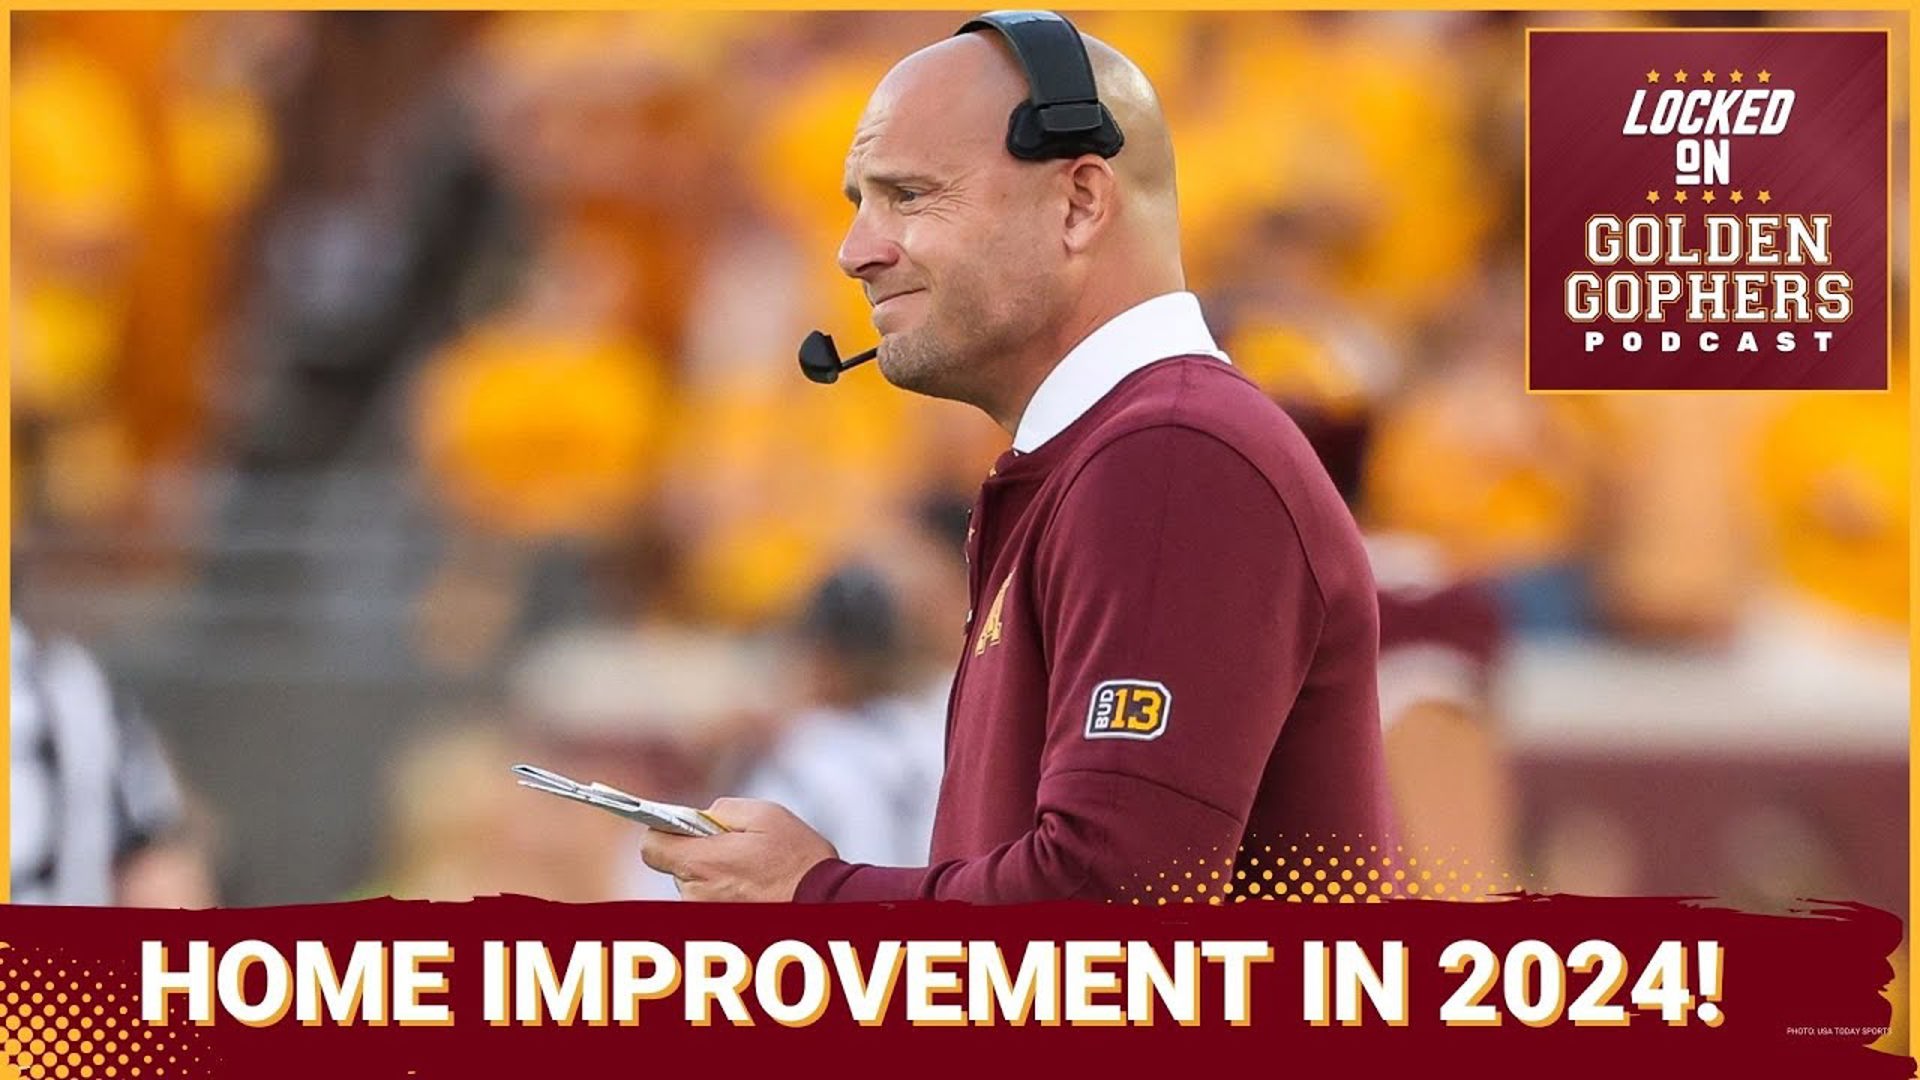 On today's Locked On Golden Gophers, host Kane Rob, discusses how the Minnesota Gophers home games could play a massive factor on the Gophers overall success in 2024